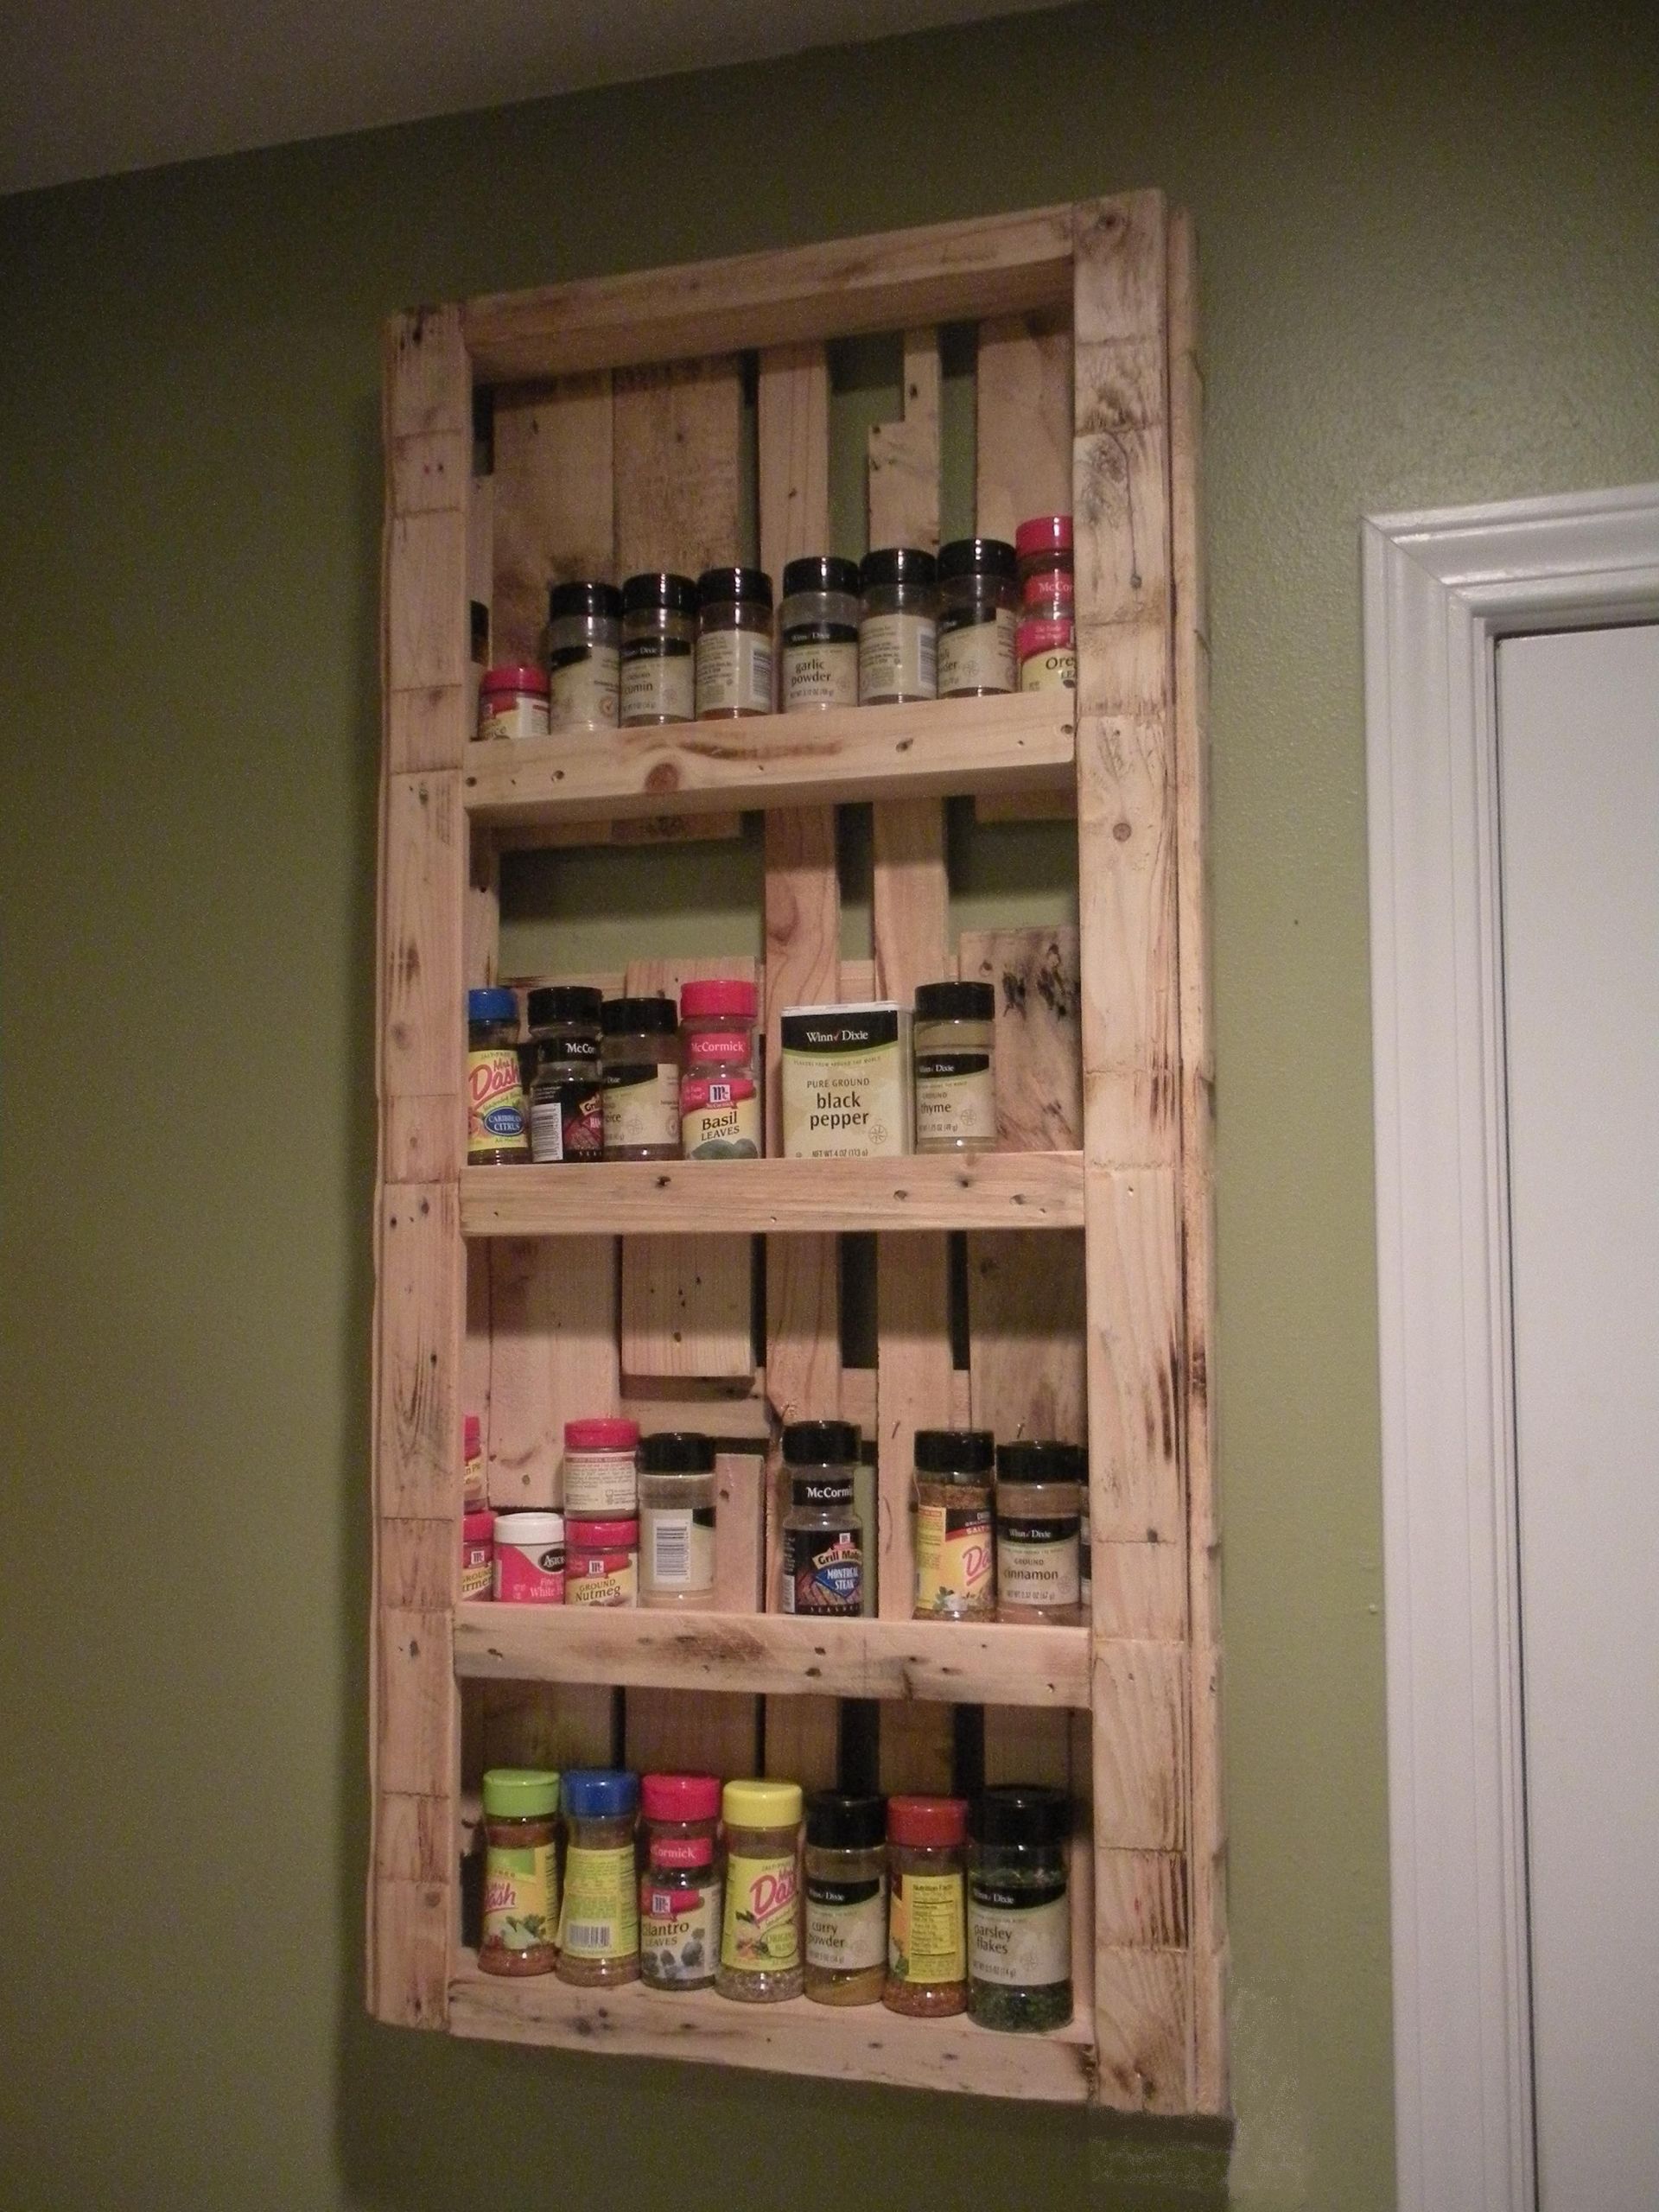 Spice Rack Ideas DIY
 My spice rack made from pallets